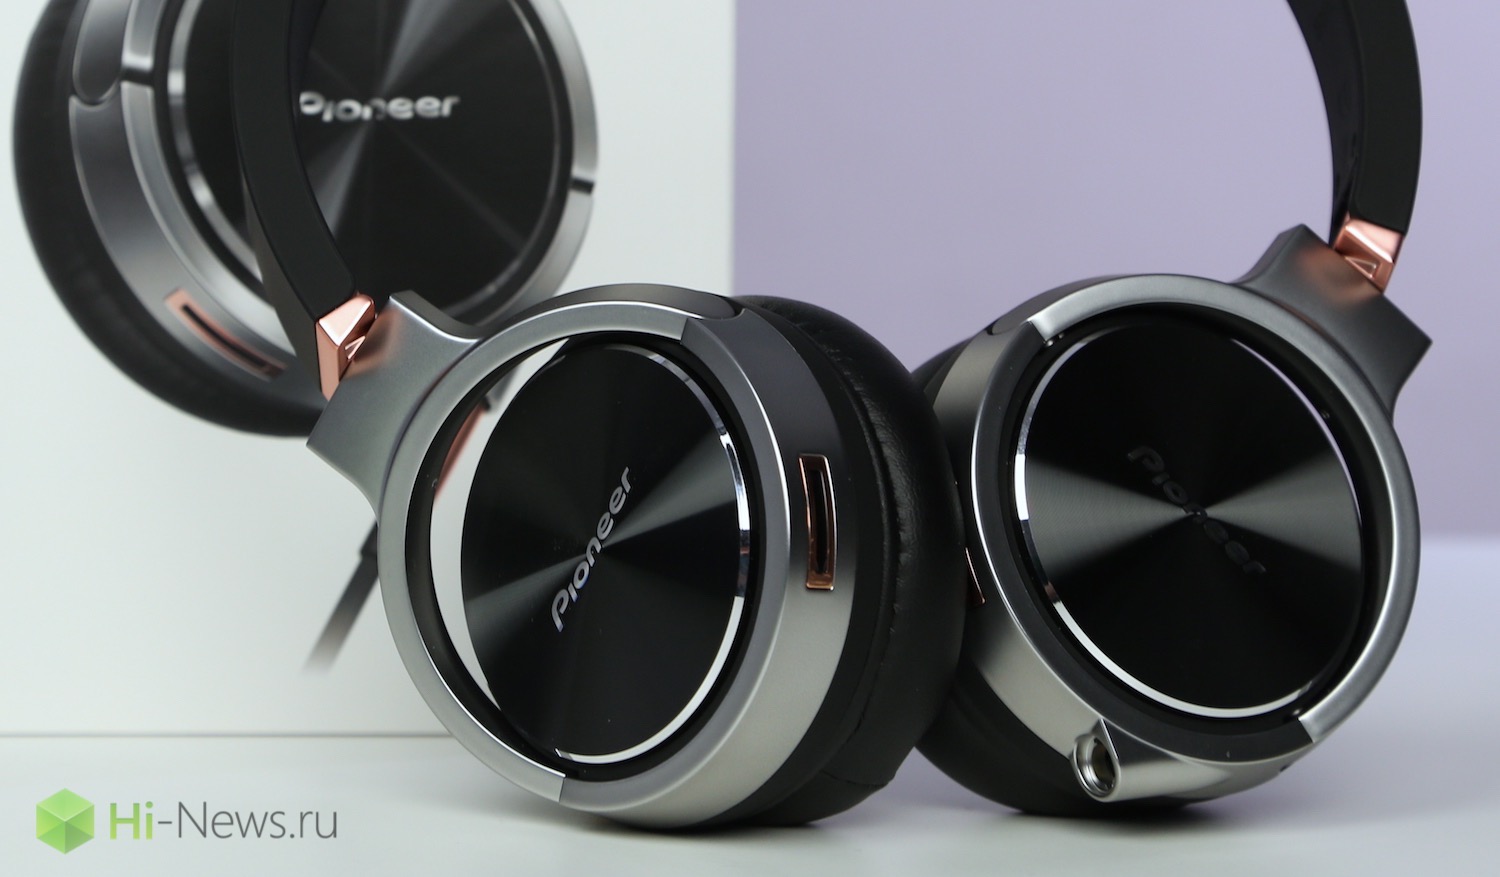 Pioneer SE-MHR5 — choice conservative audiophile